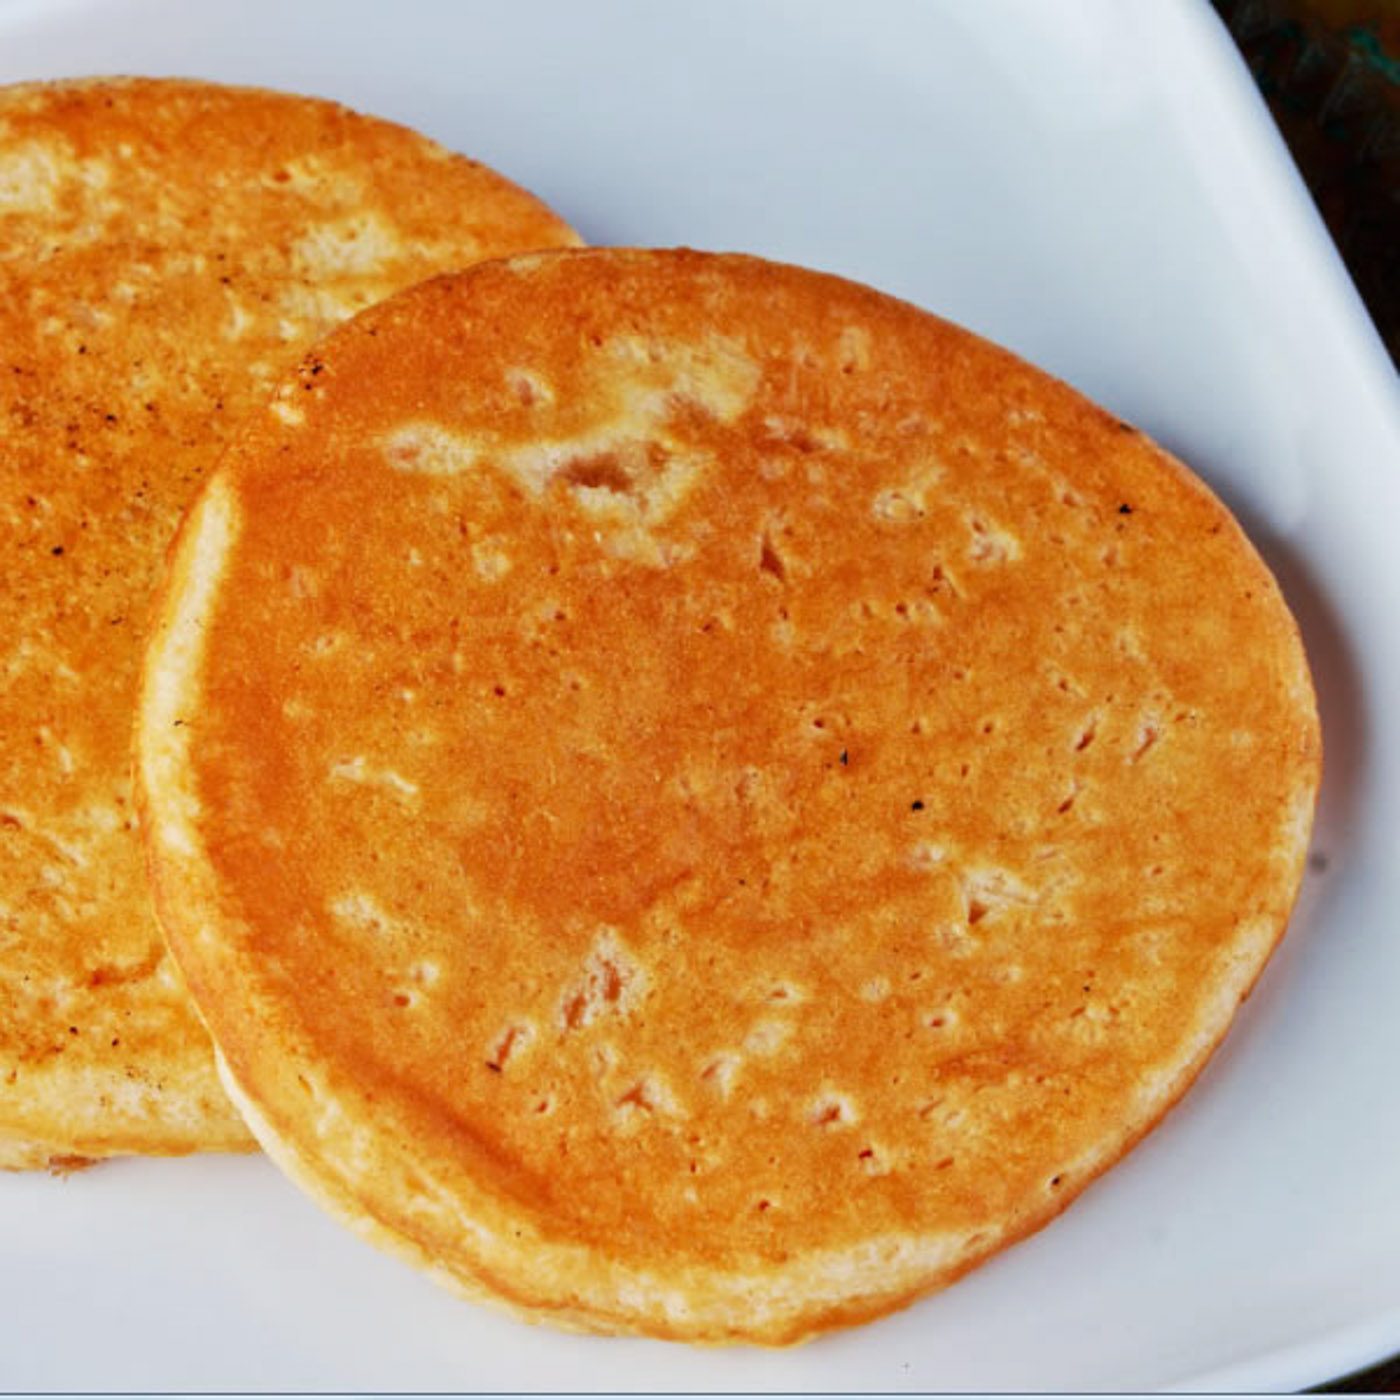 APAM. While the crepe is thin, apam is thick, as it is Sulu's native pancake. Photo courtesy of Dennis Coffee Garden 